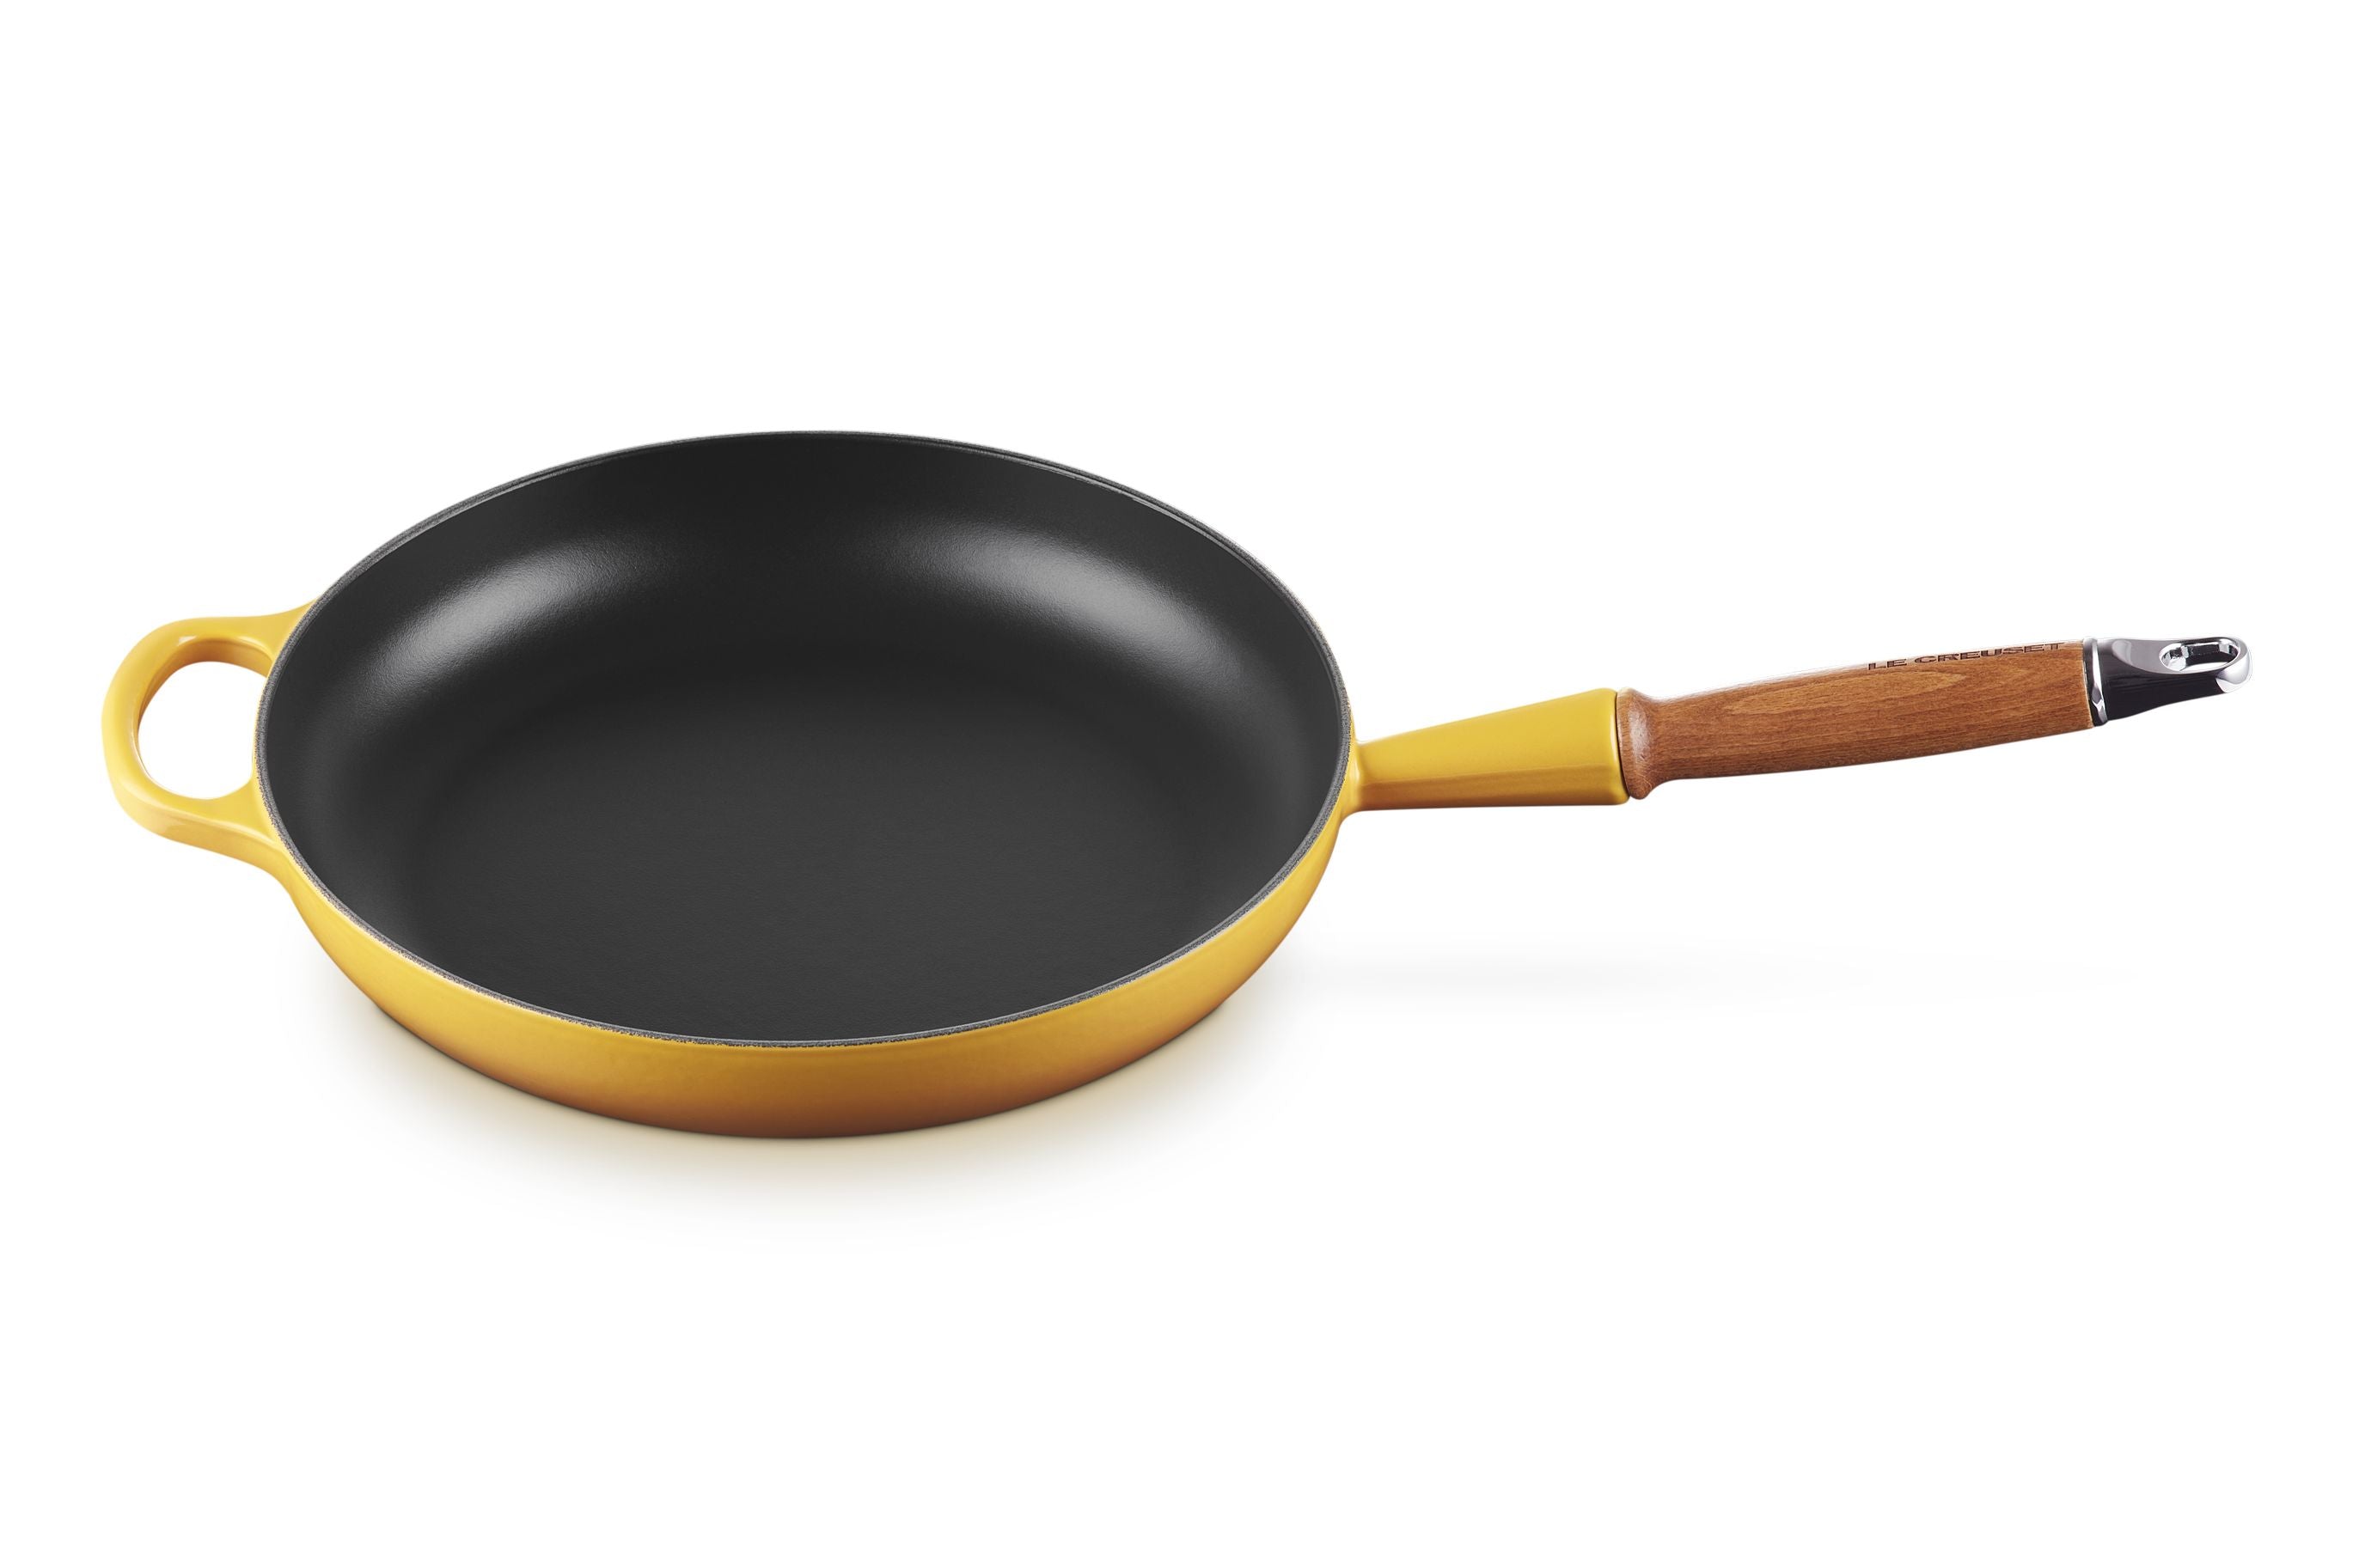 Le Creuset Cast Iron Frying Pan With Wooden Handle 28 Cm, Nectar